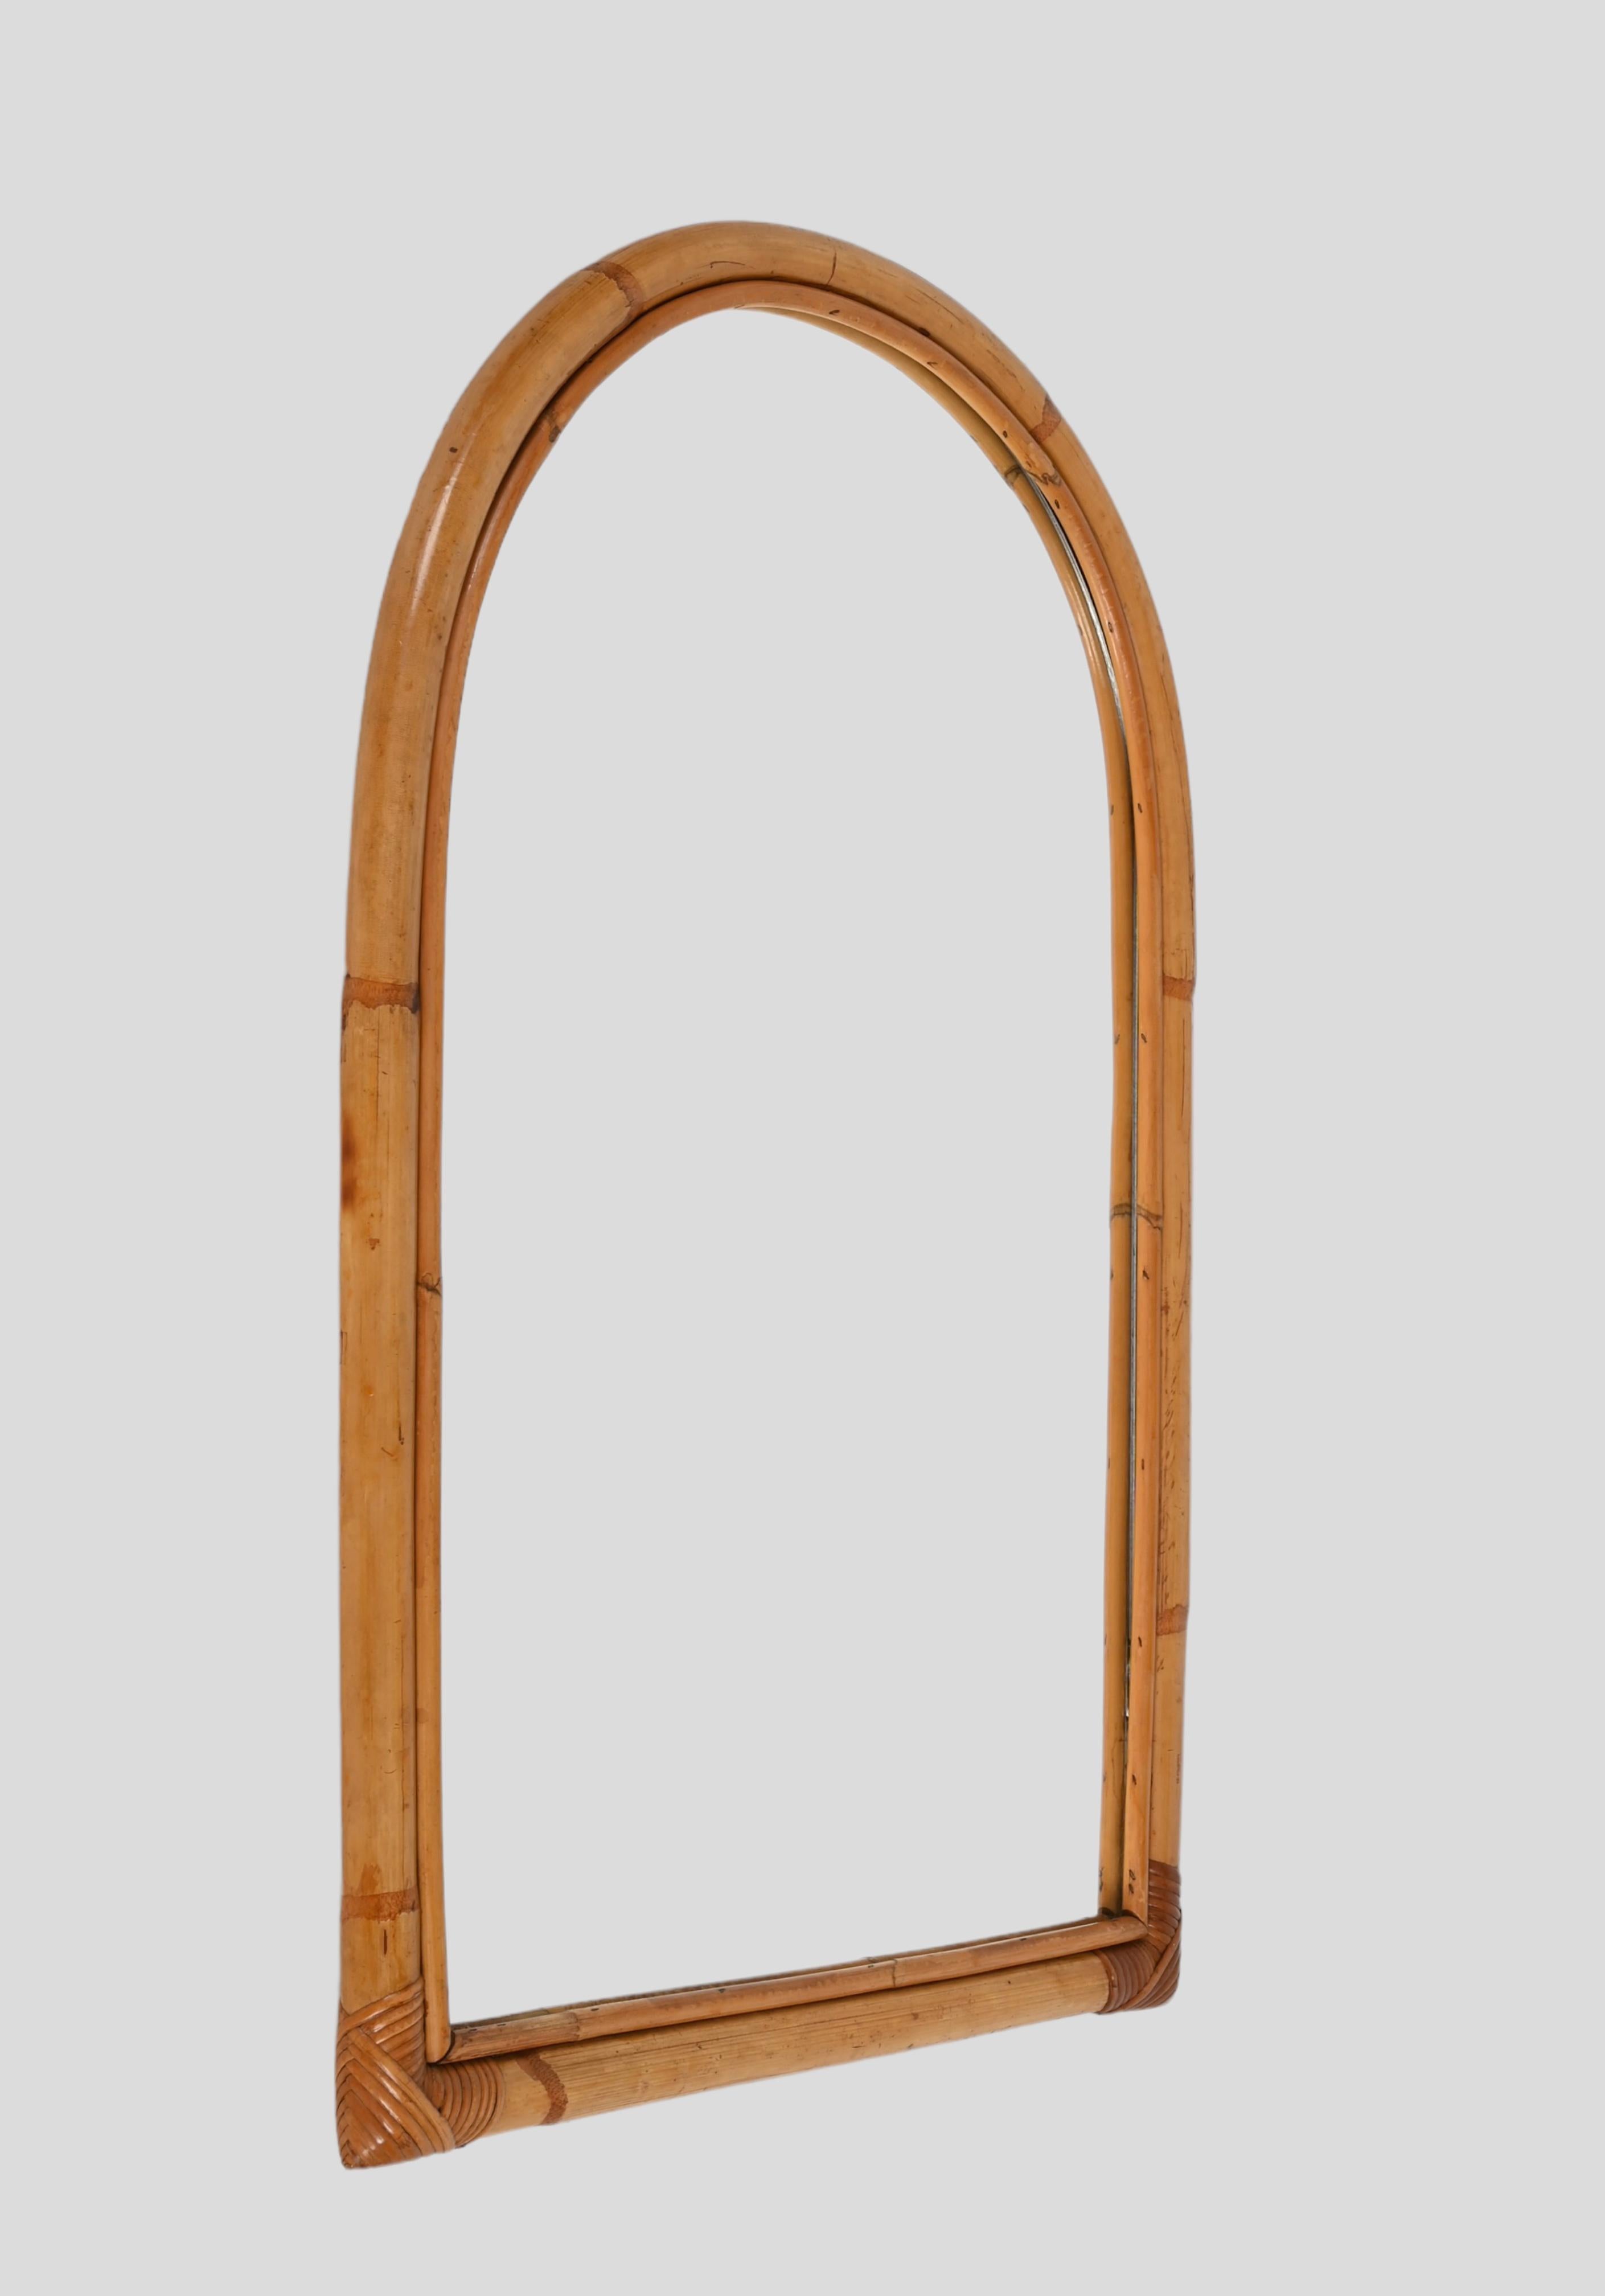 Wonderful mid-century arched shaped mirror with double bamboo cane frame. This fantastic item was produced in Italy in the 1970s.

The way the two-round bamboo lines and the glass integrate via the sinusoidal wicker is superb and conveys infinite